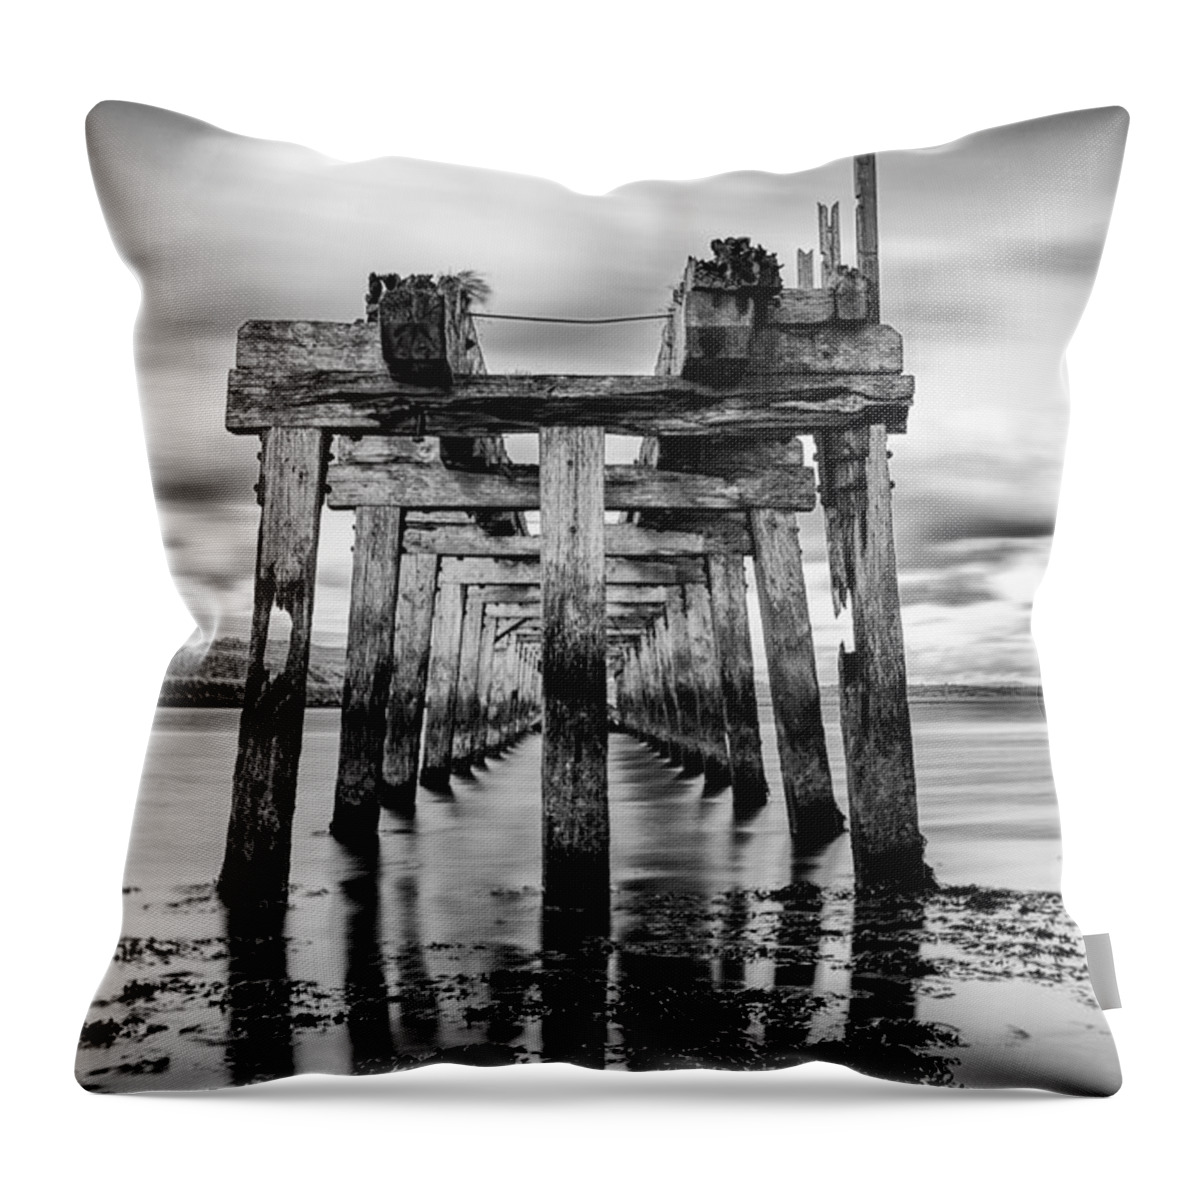 Castlerock Throw Pillow featuring the photograph Castlerock Old Jetty by Nigel R Bell